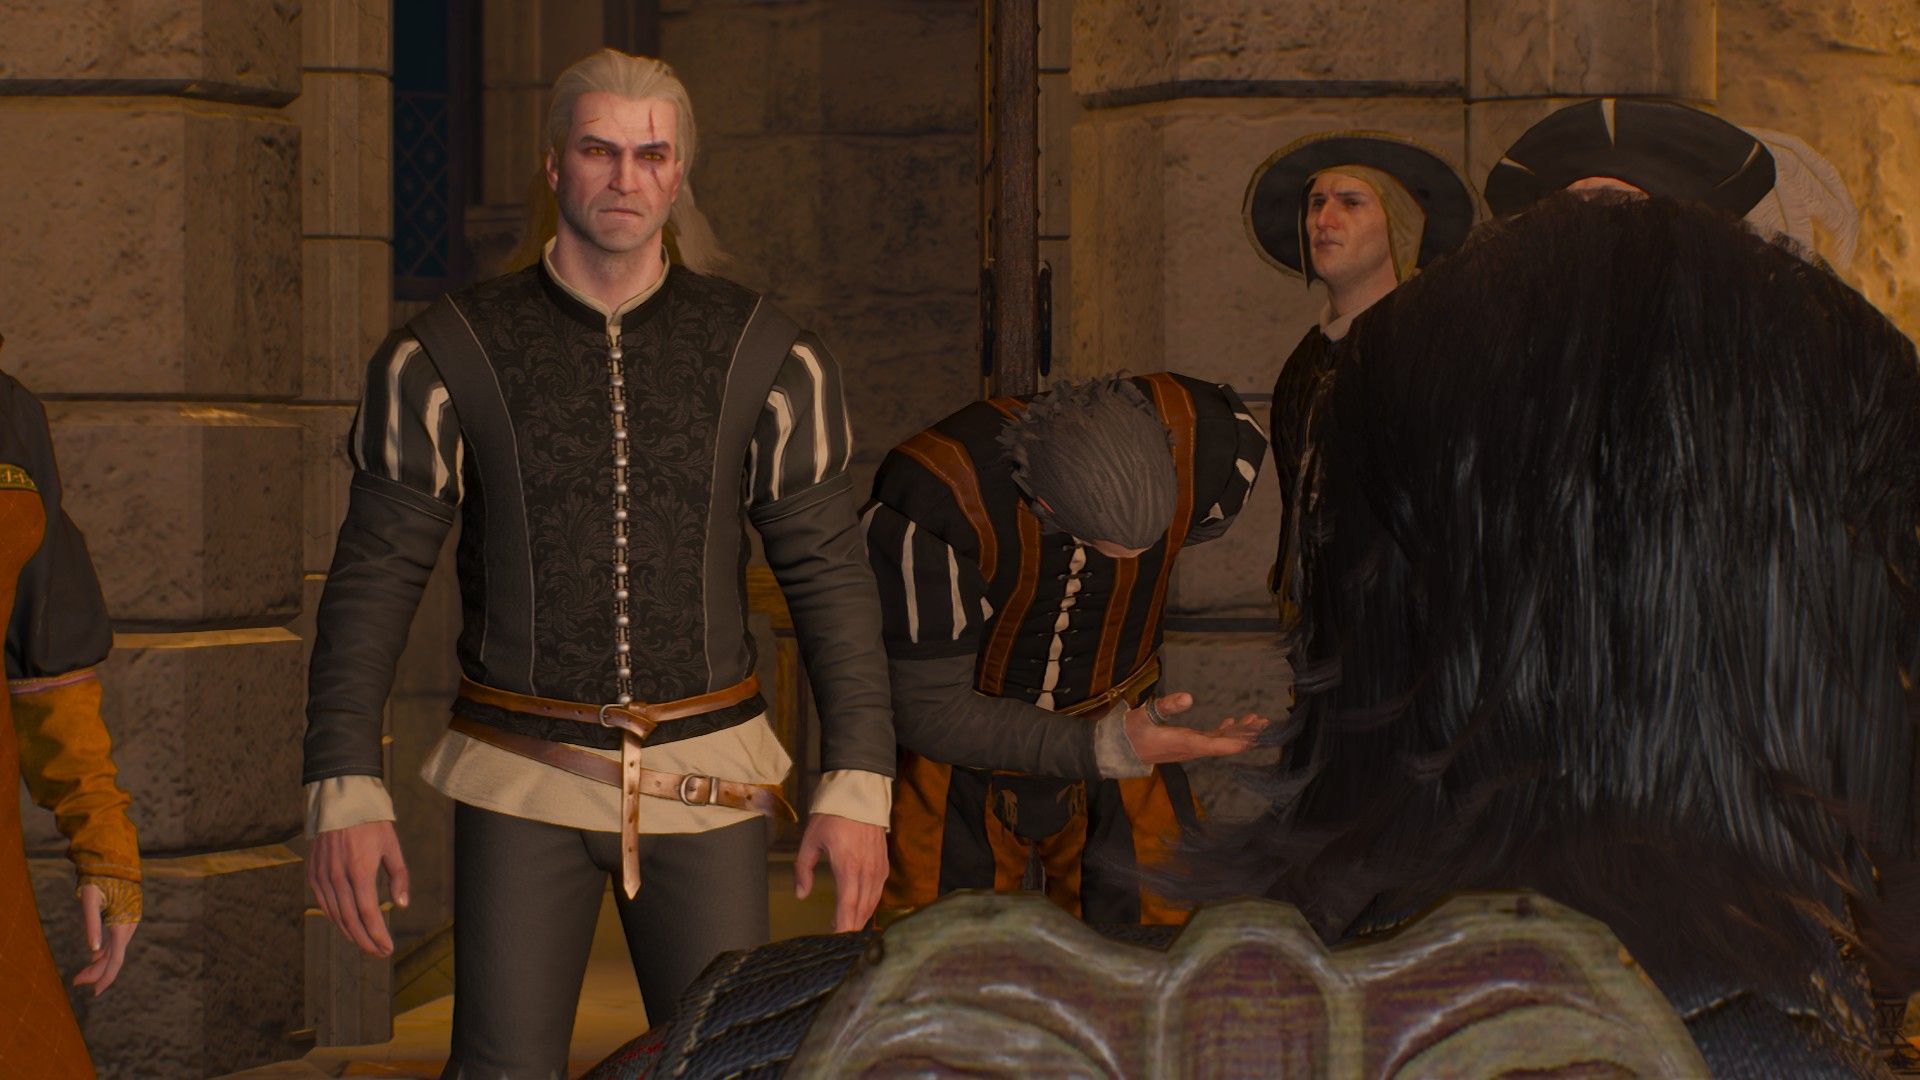 Geralt stares at Emhyr while a noble makes a sweeping bow in the background.